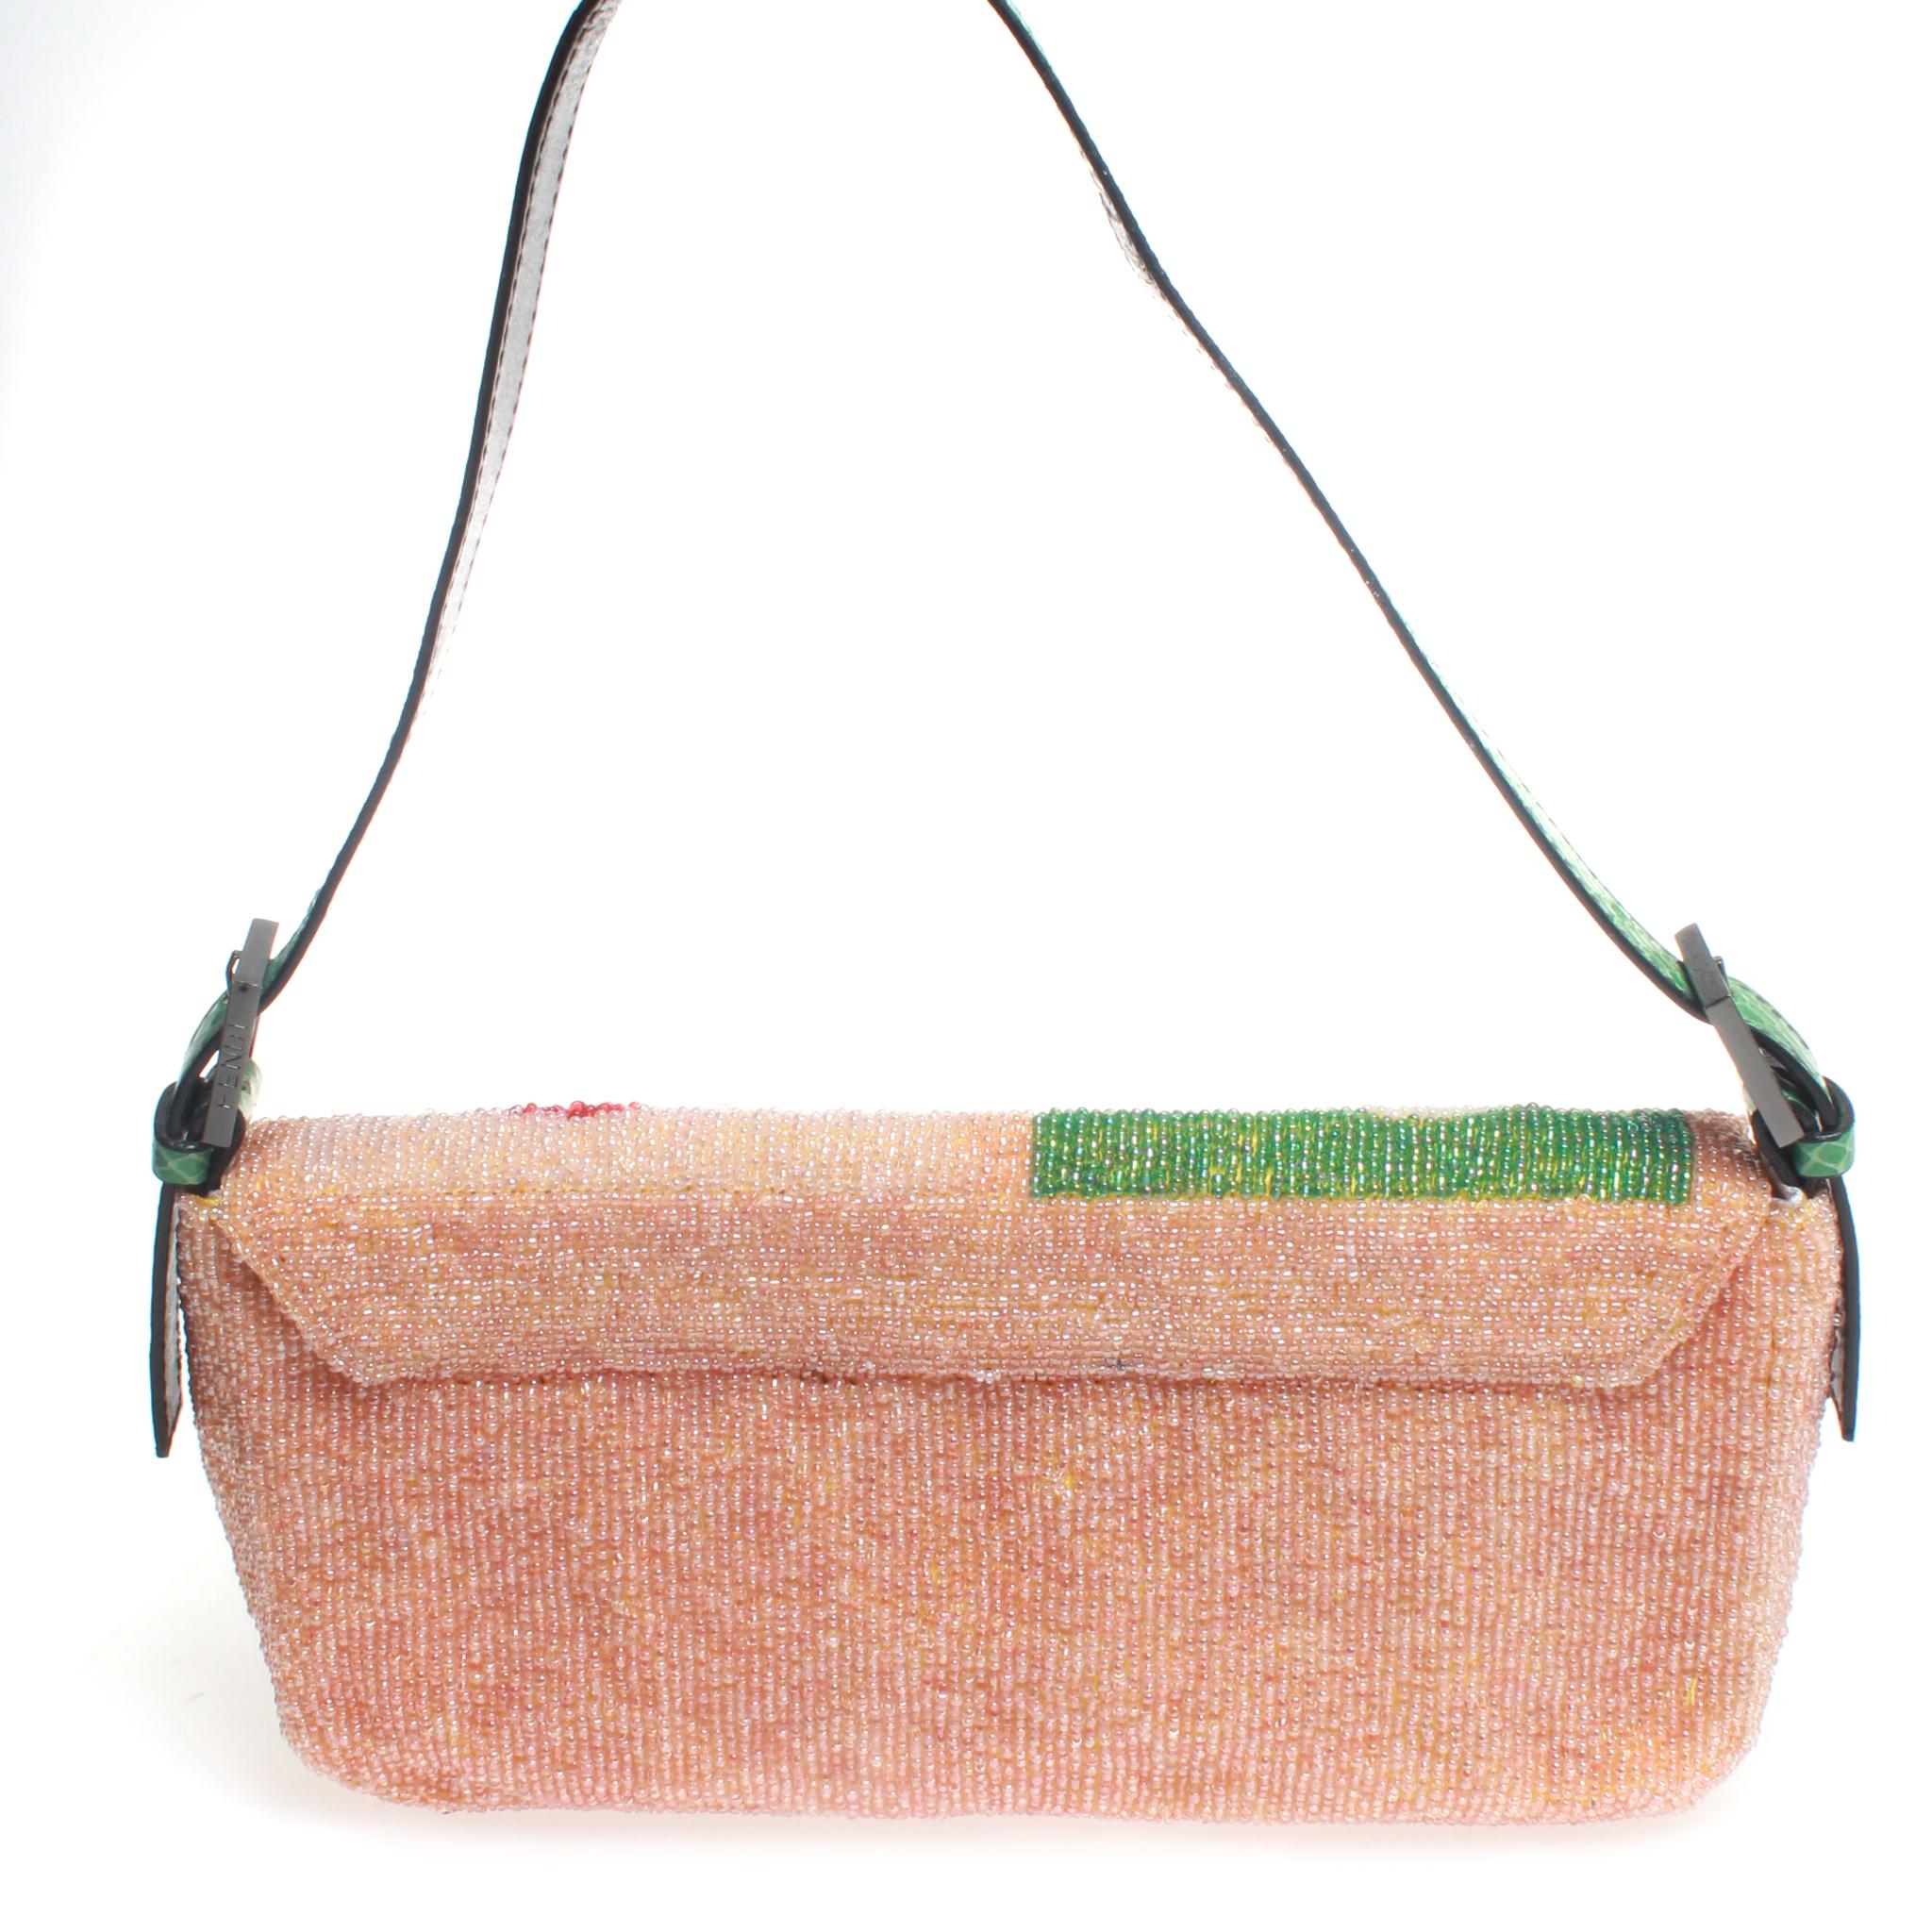 Incredibly detailed Fendi multi needle point beaded baguette bag with green snakeskin strap and magnetic front flap closure. This Fendi baguette is perfect for adding an explosion of color to any outfit with it's magnificent geometric patterns in